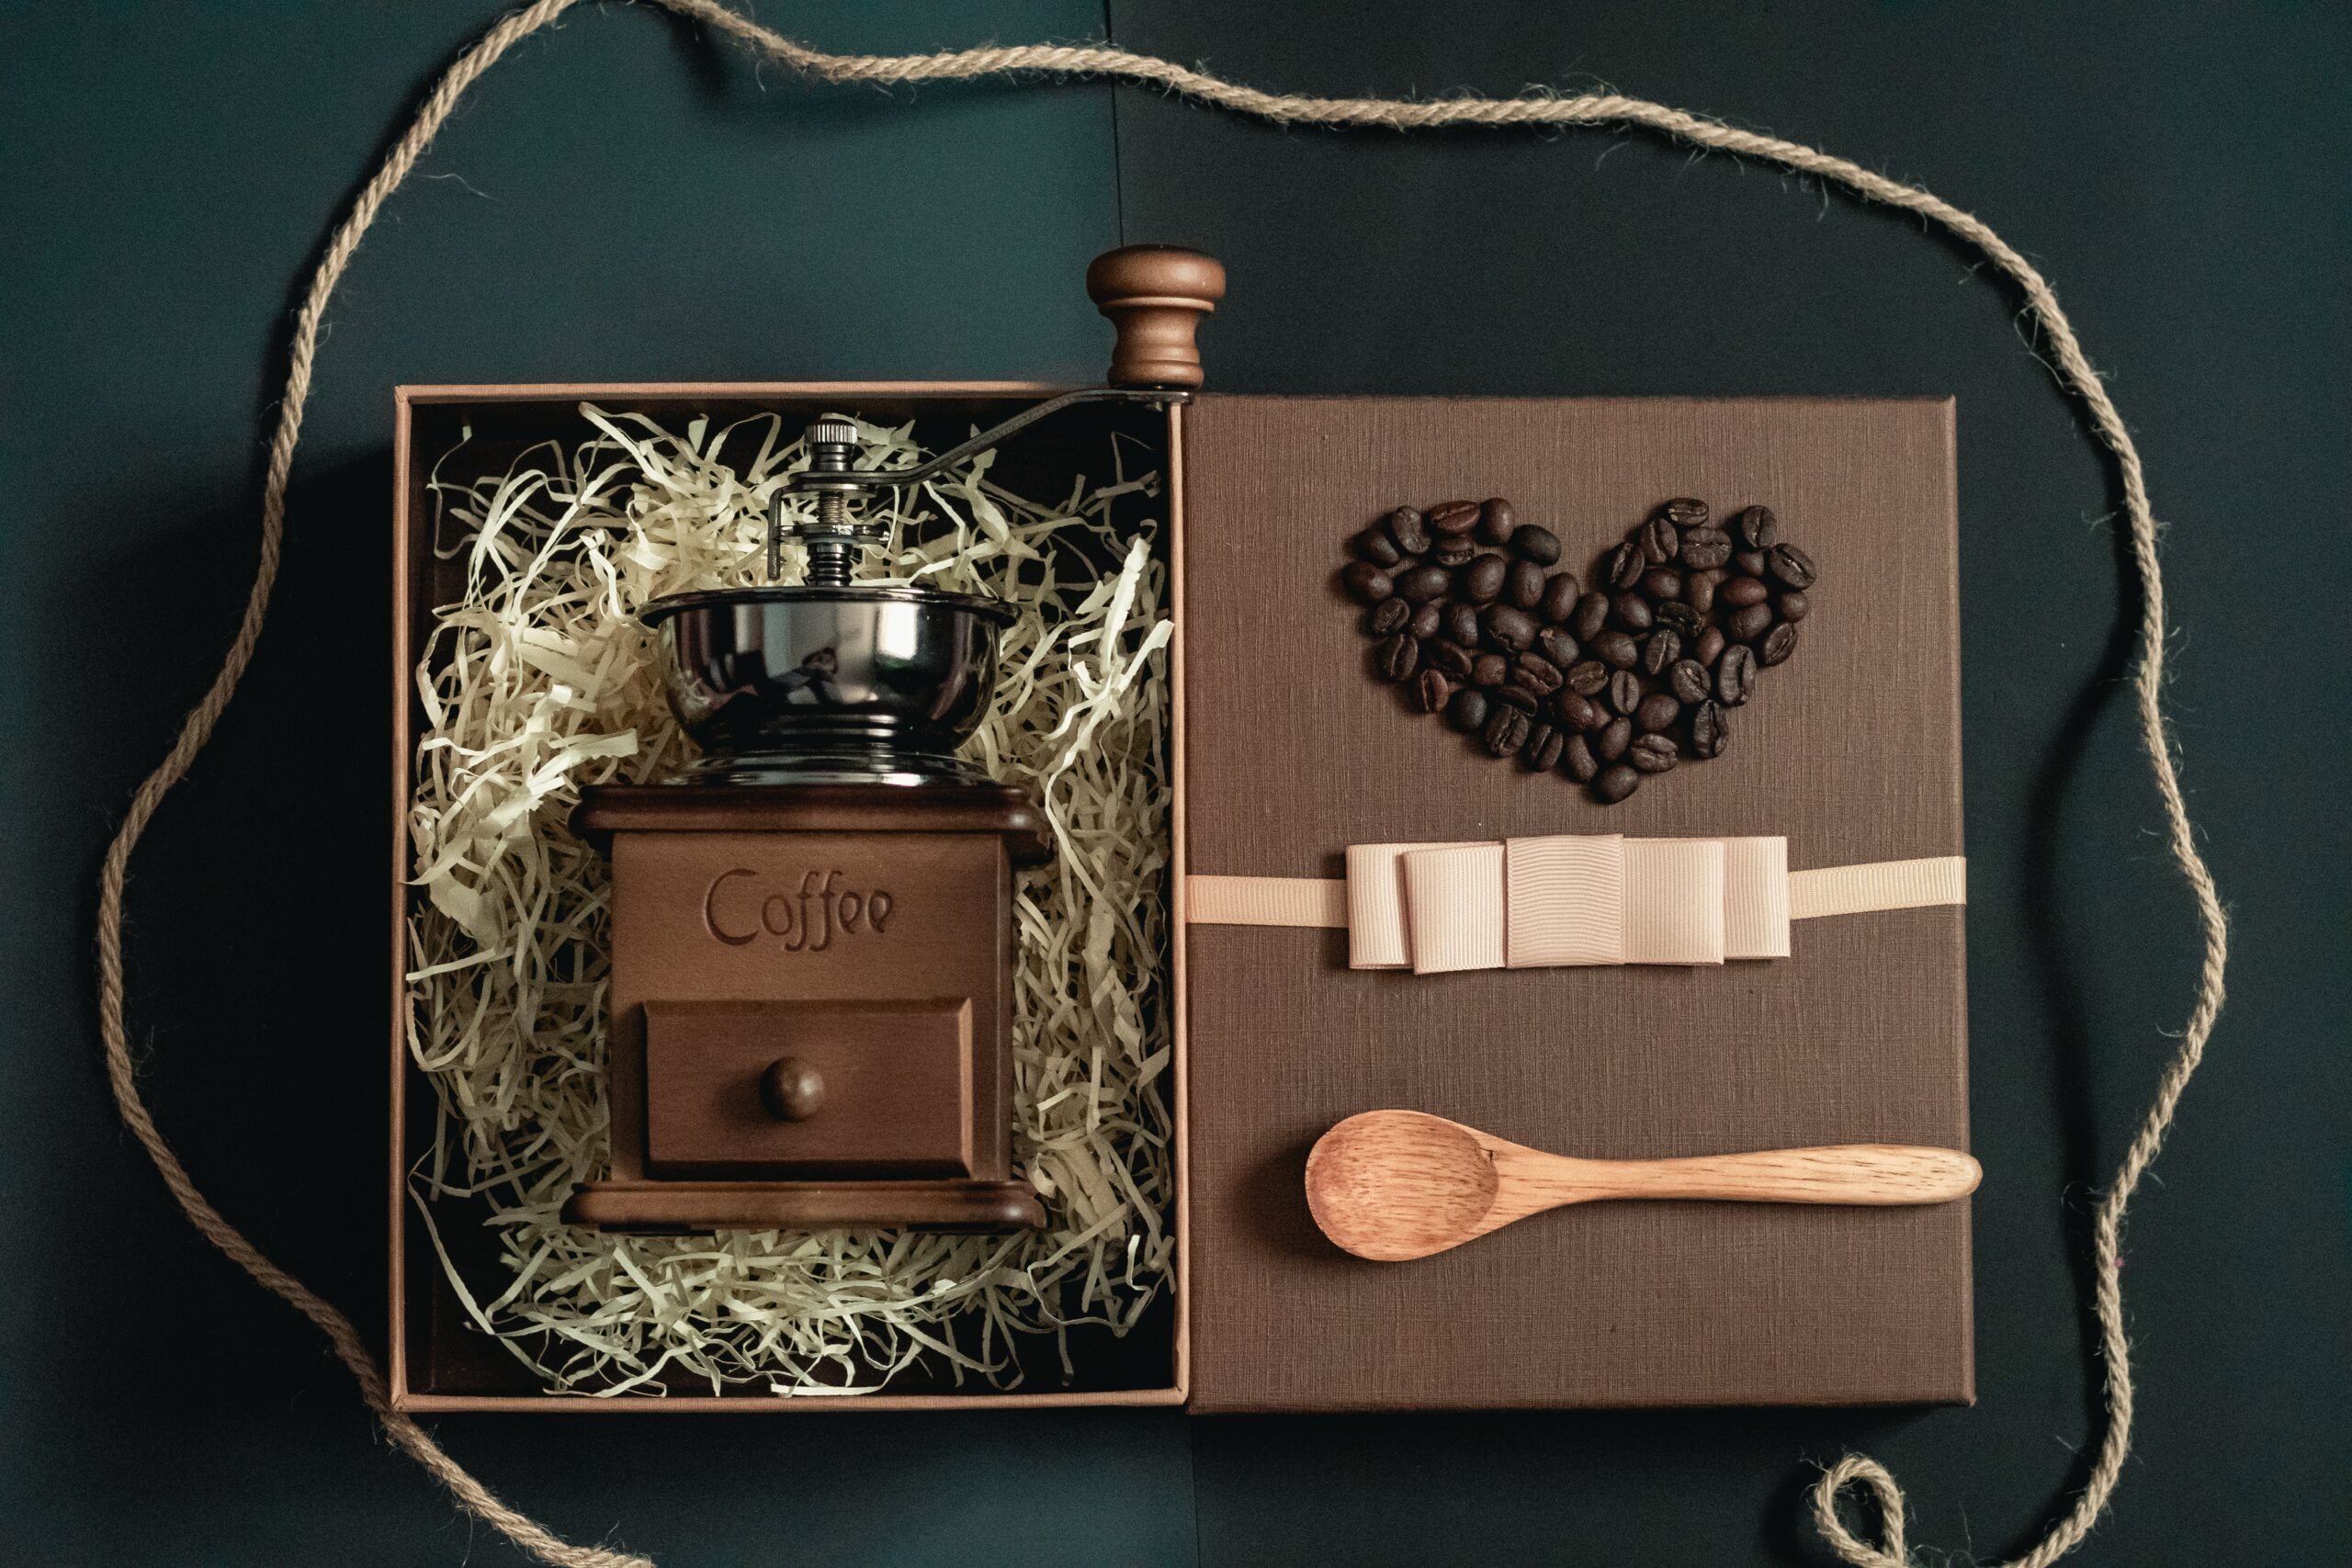 Manual coffee grinder inside a gift box